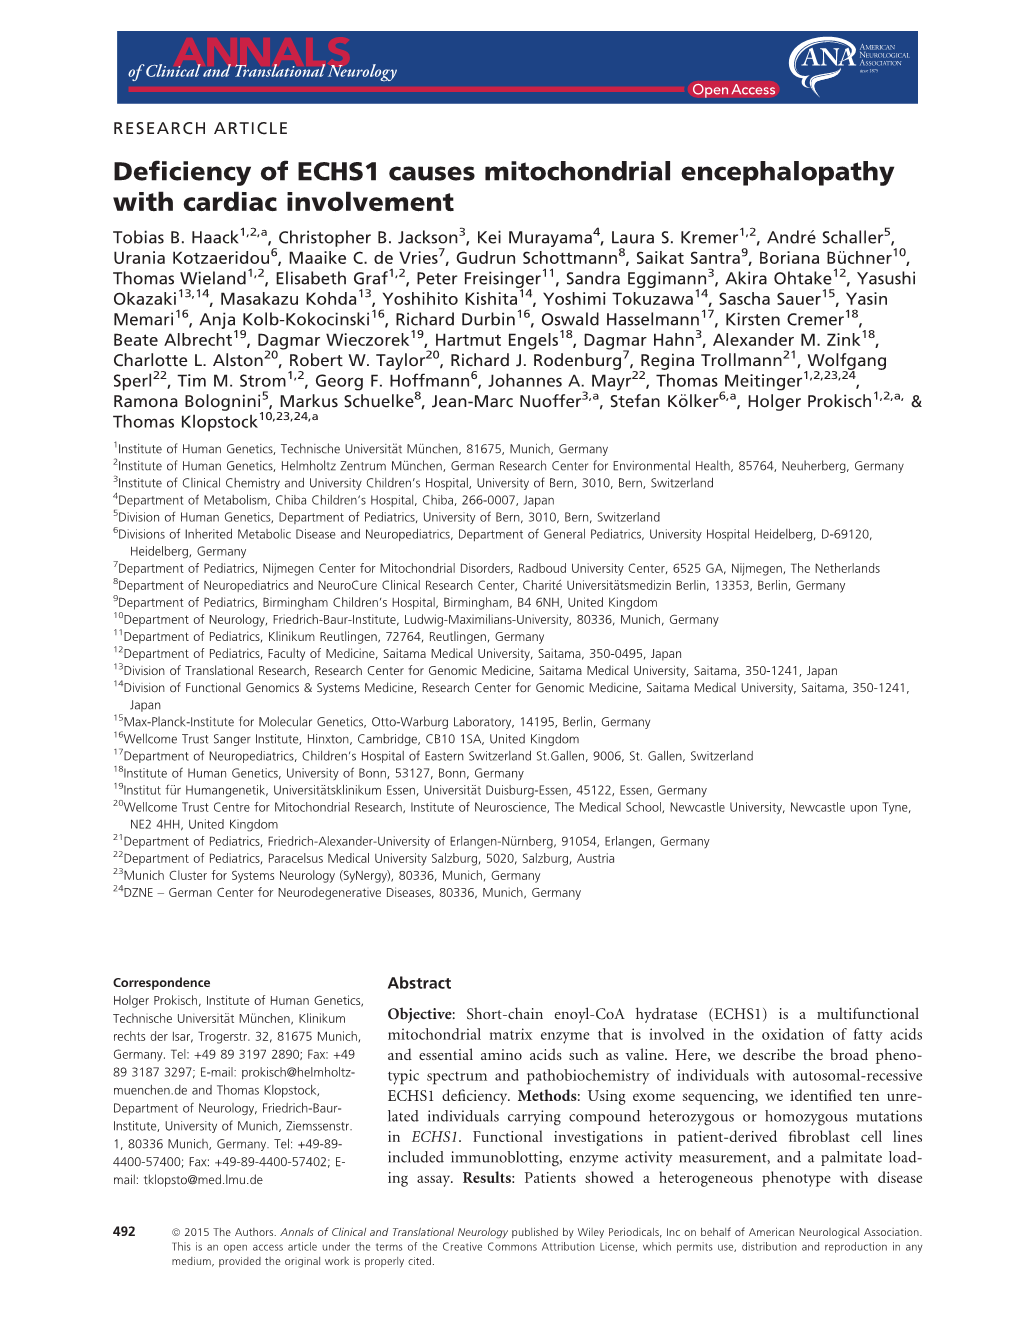 Deficiency of ECHS1 Causes Mitochondrial Encephalopathy With